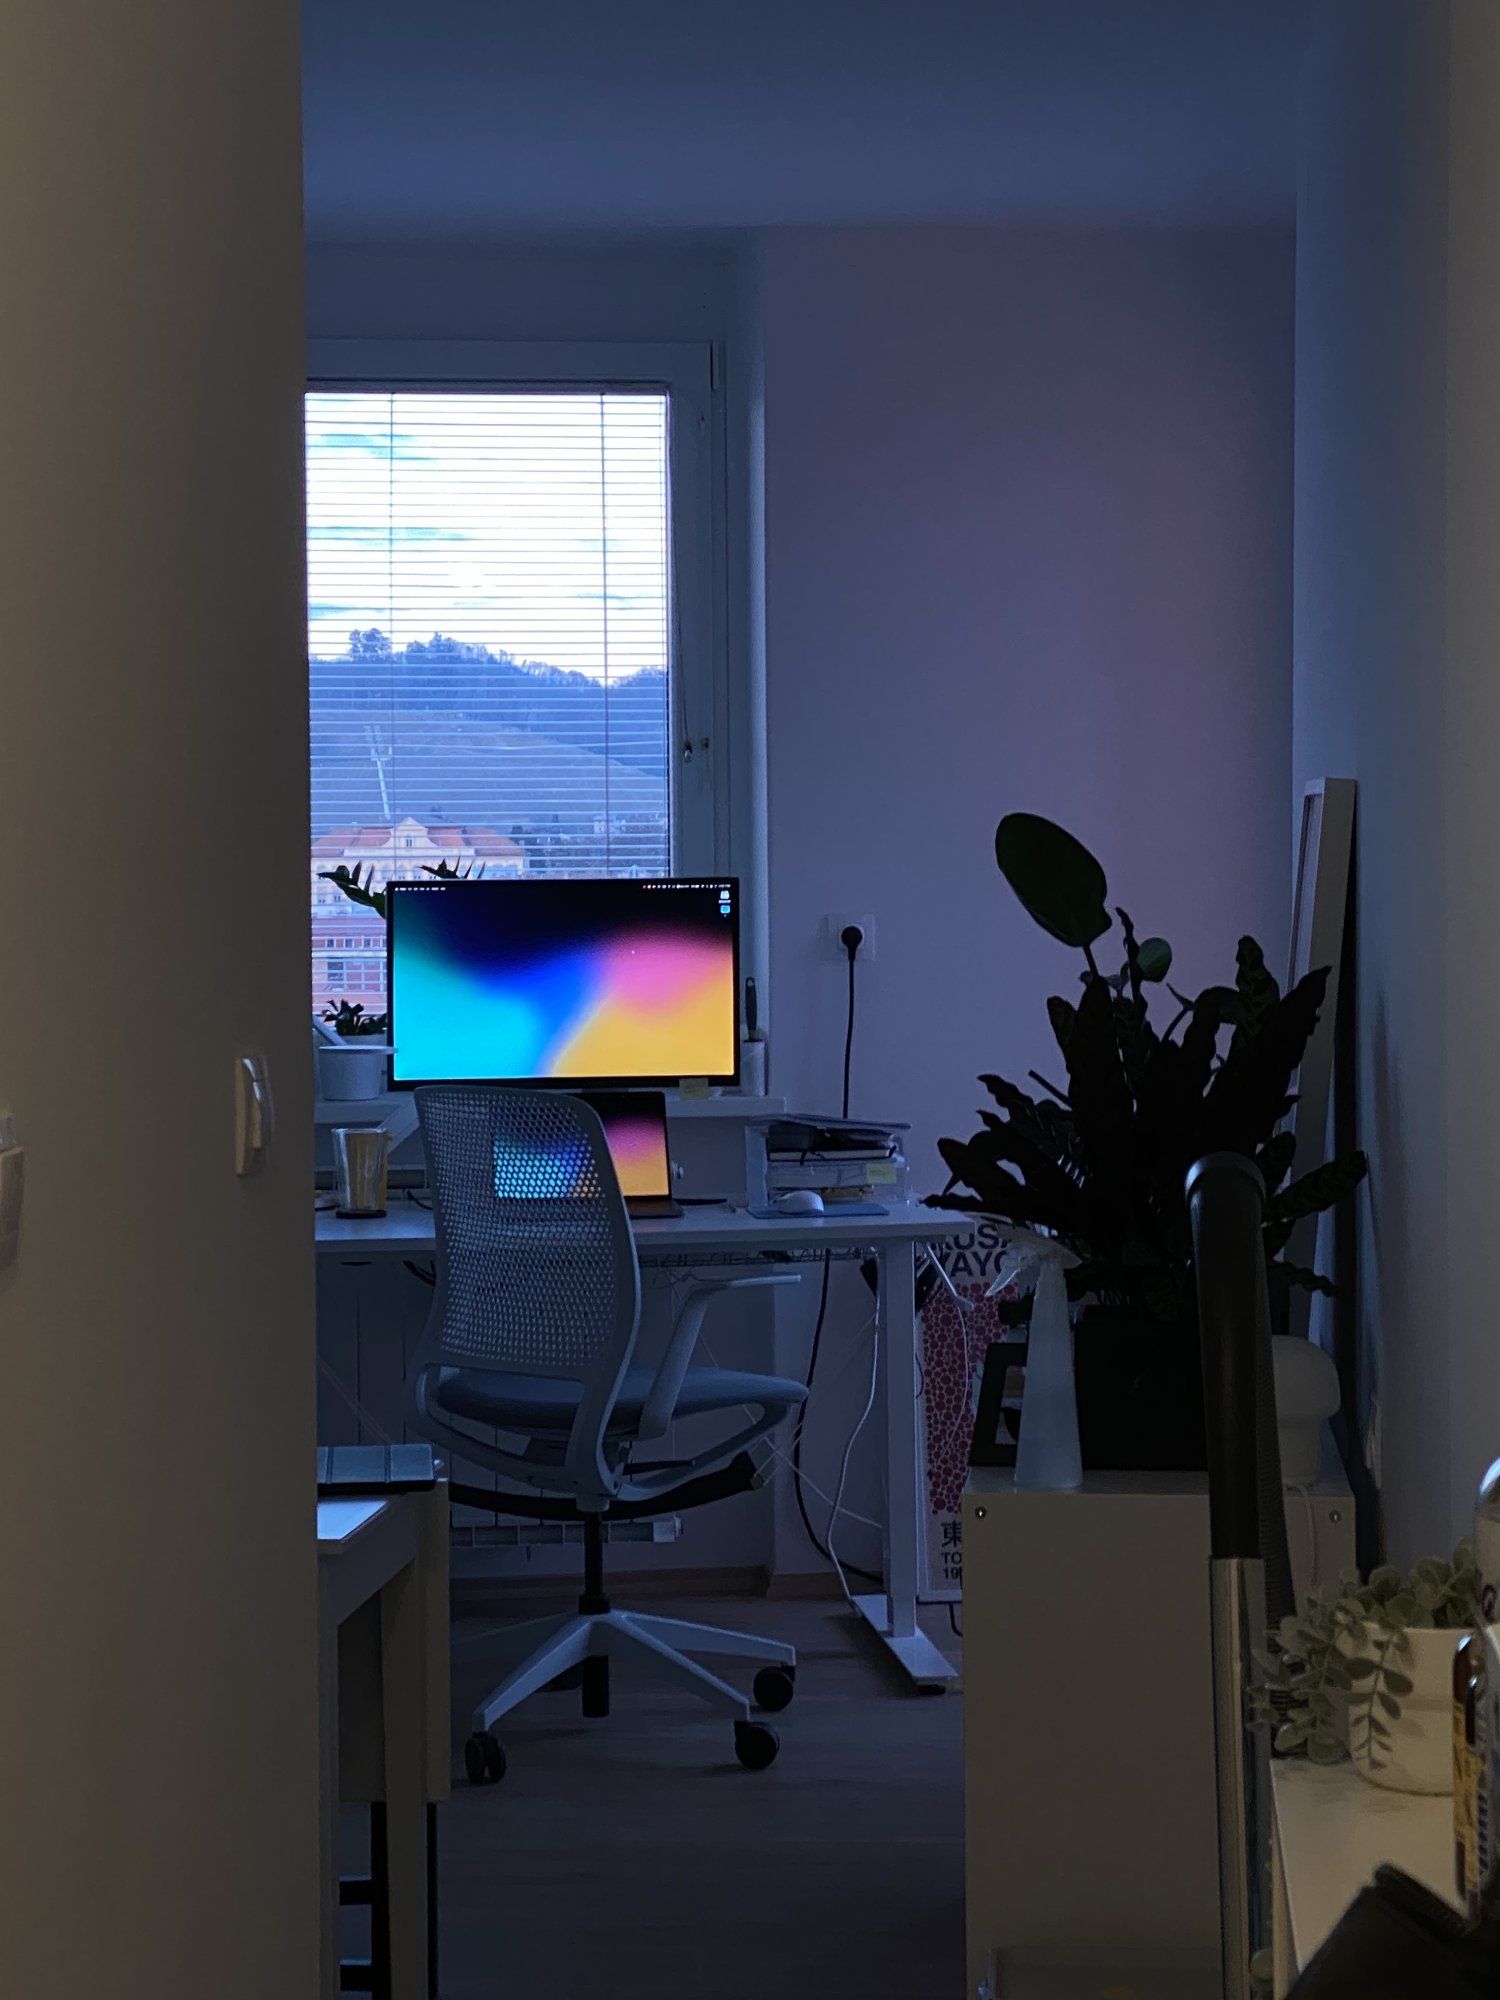 A view of a bedroom home office desk setup at dusk